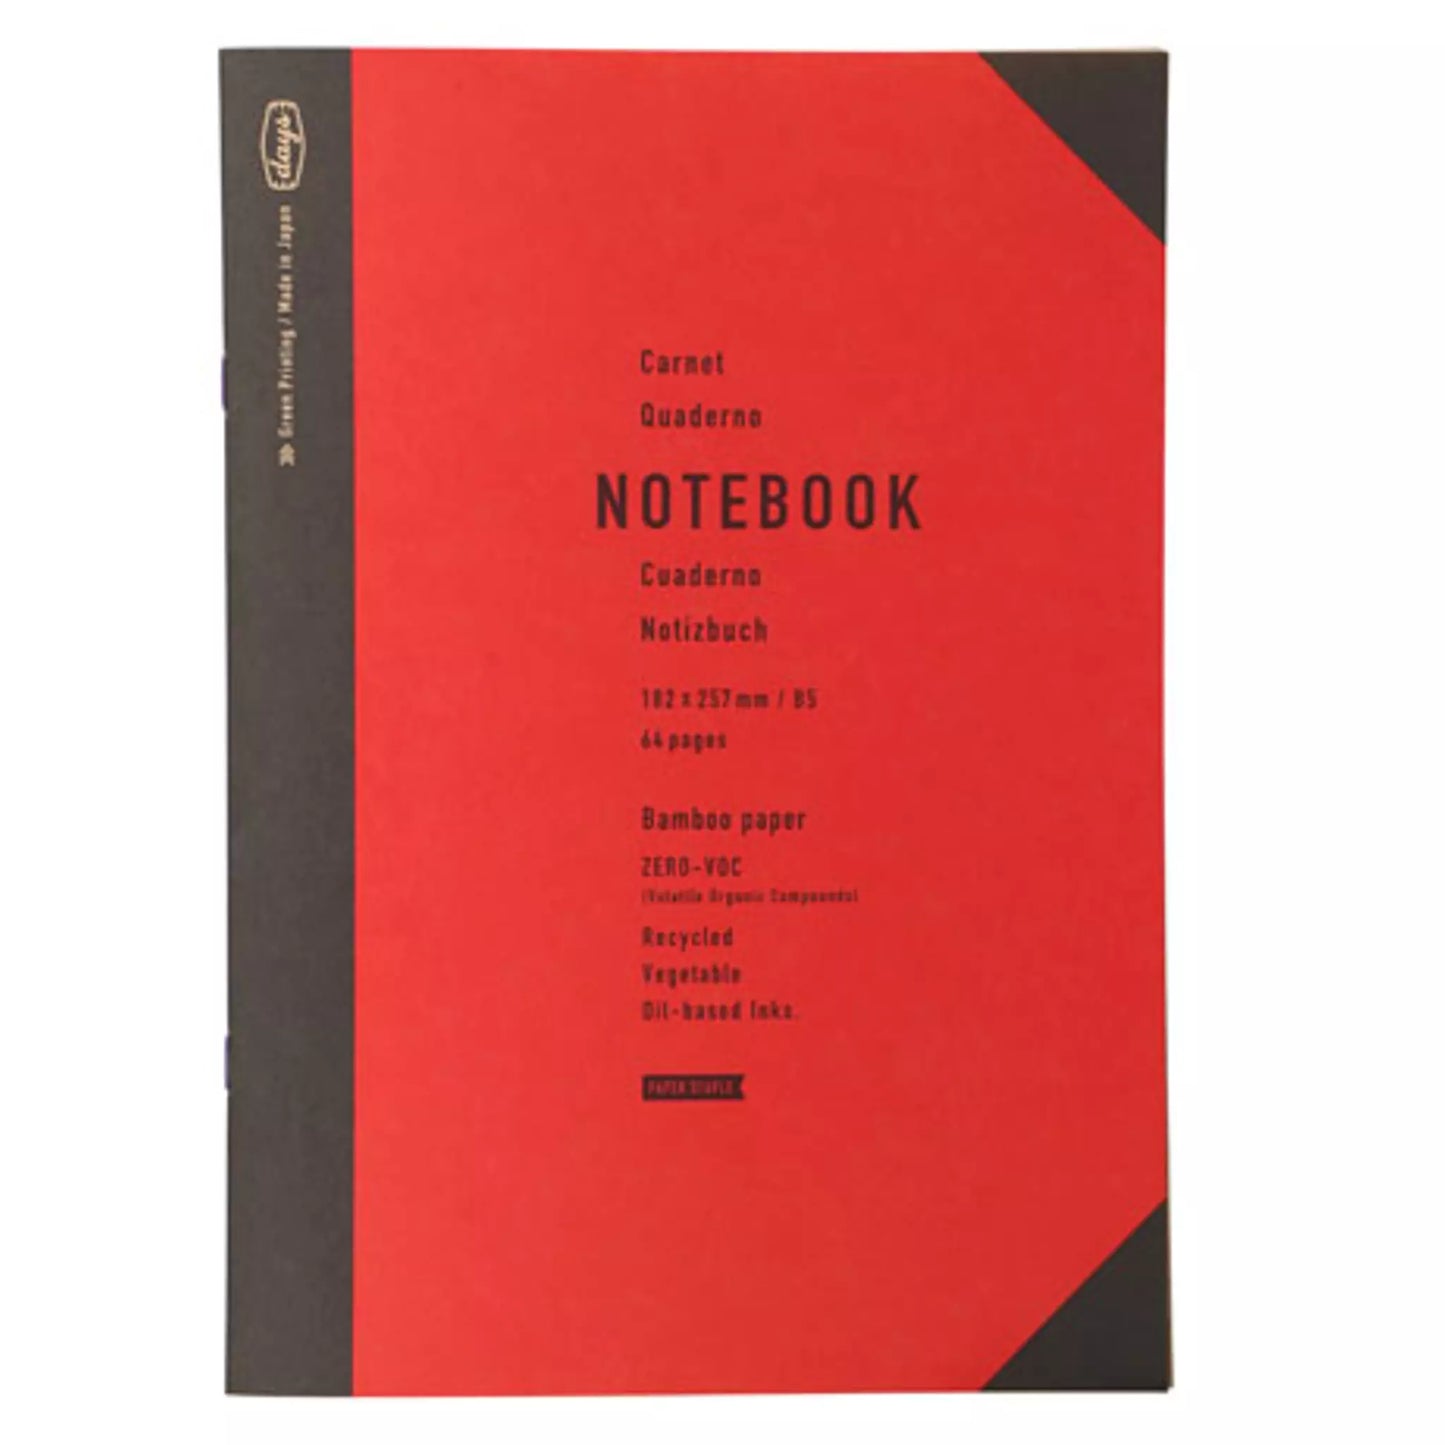 Bamboo notebook, various colours